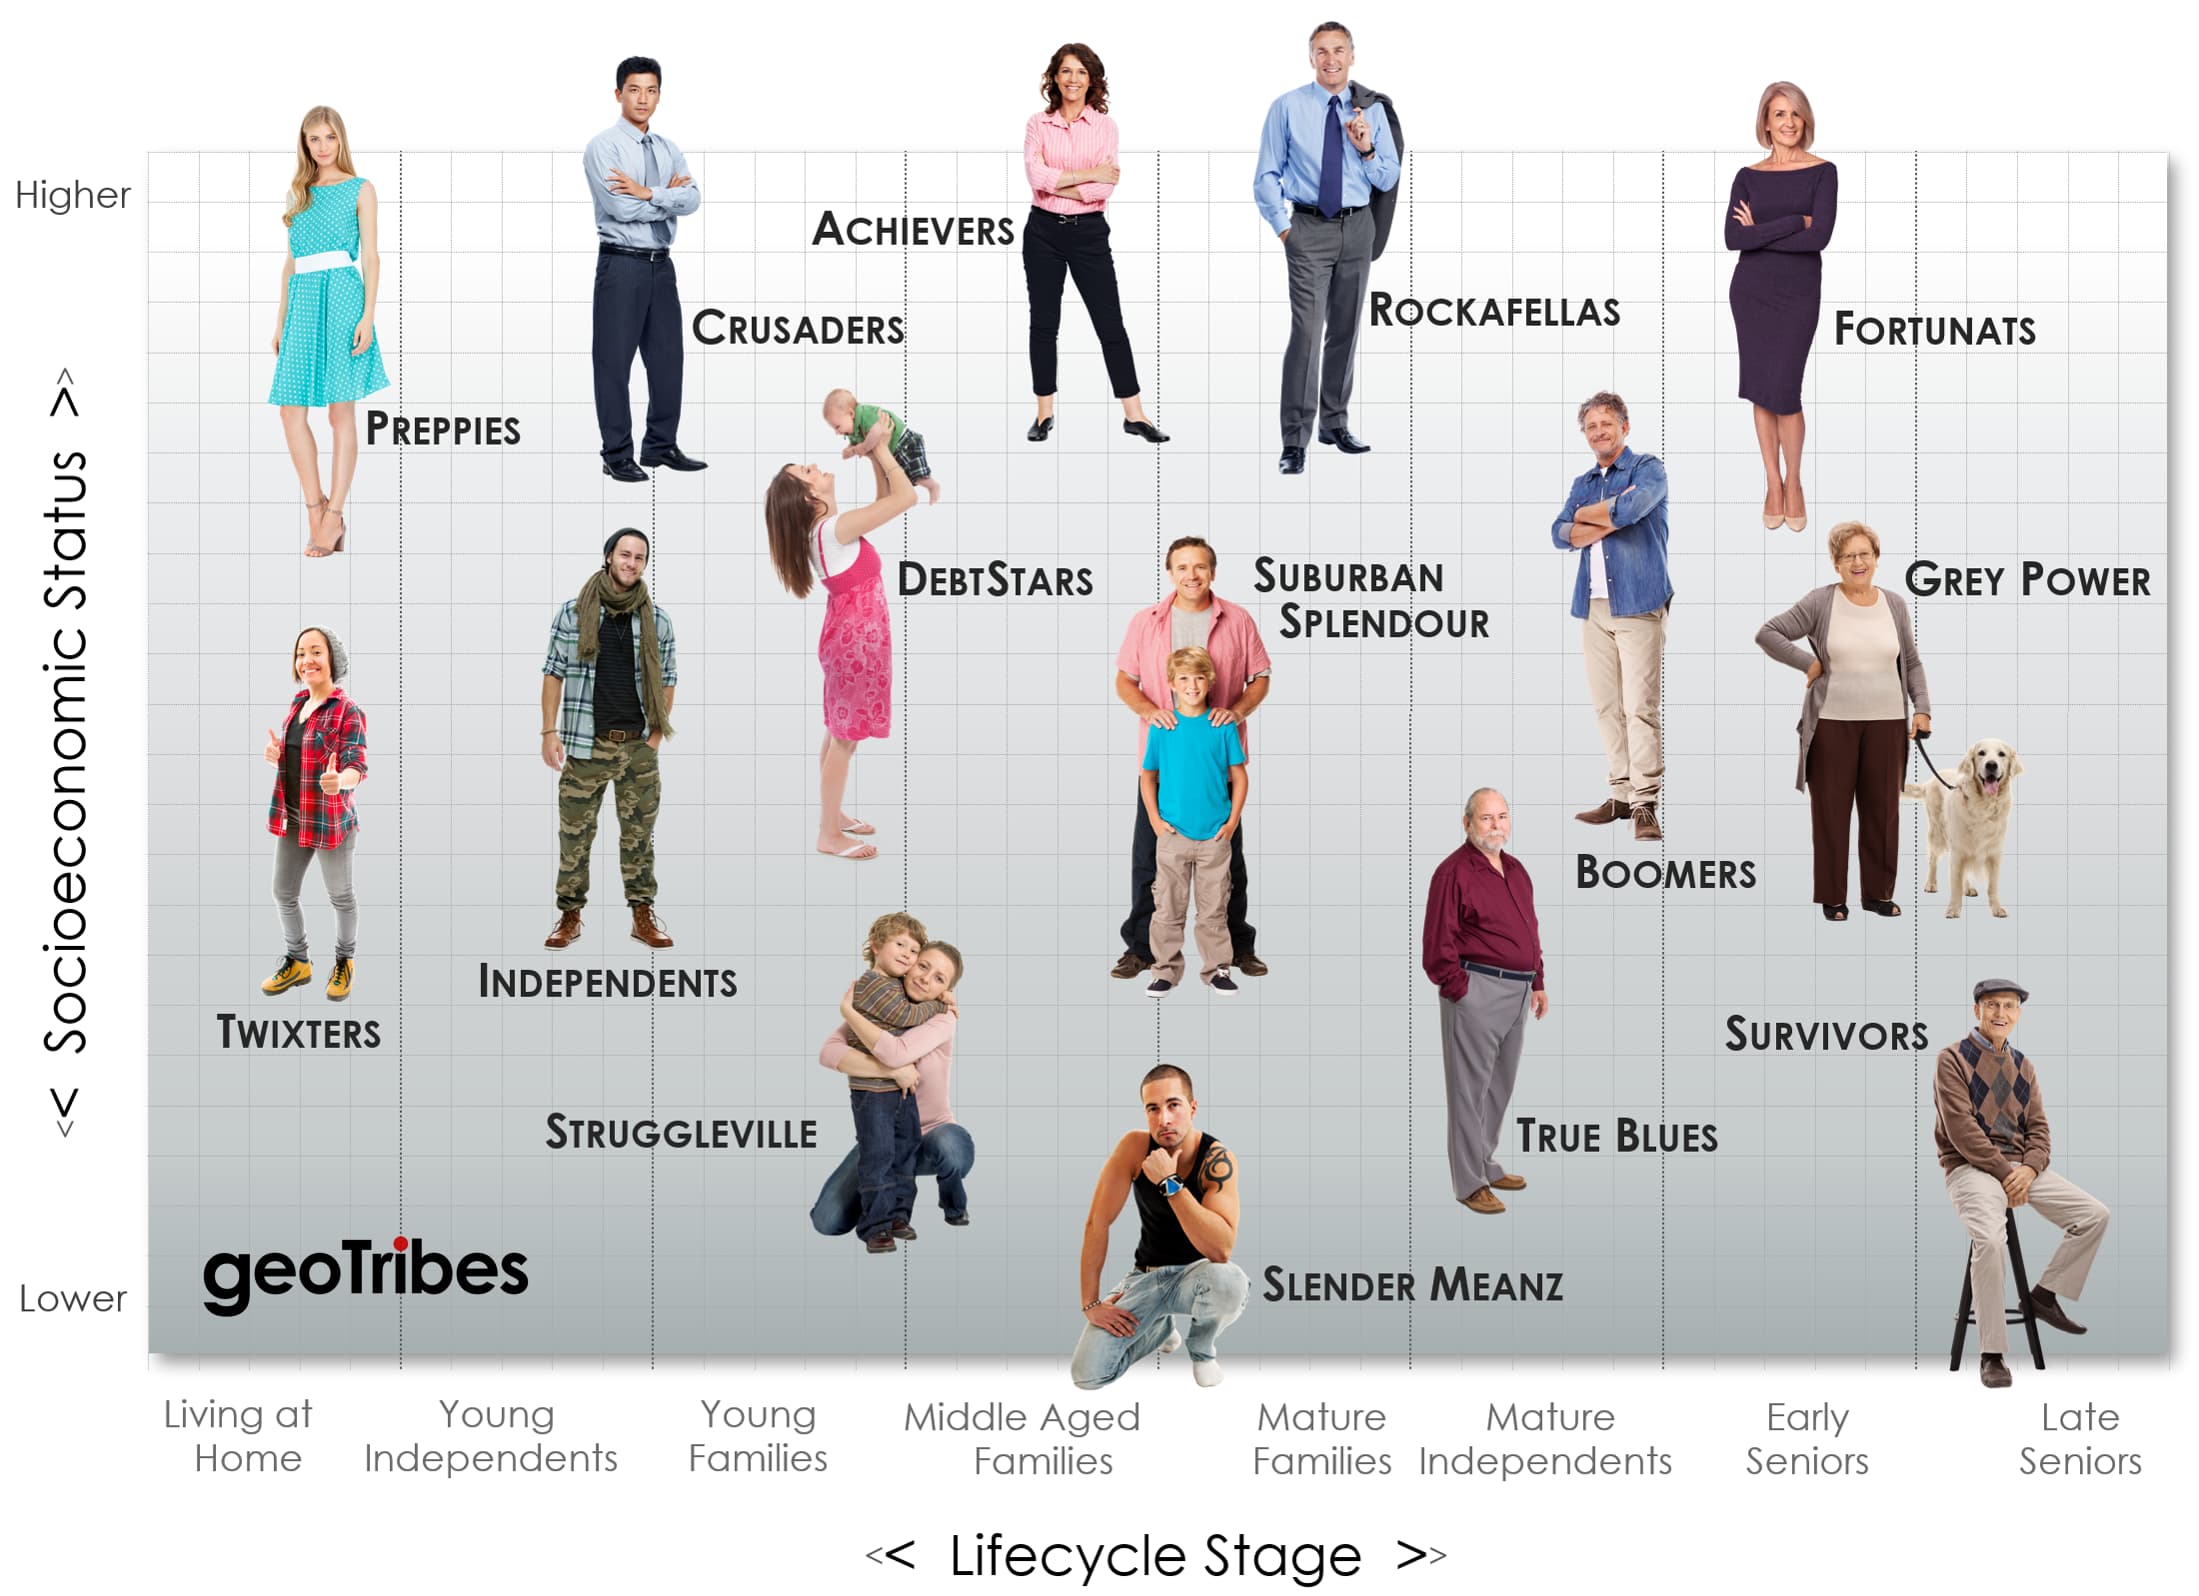 an image of lifecycle stage vs socioeconomic status chart